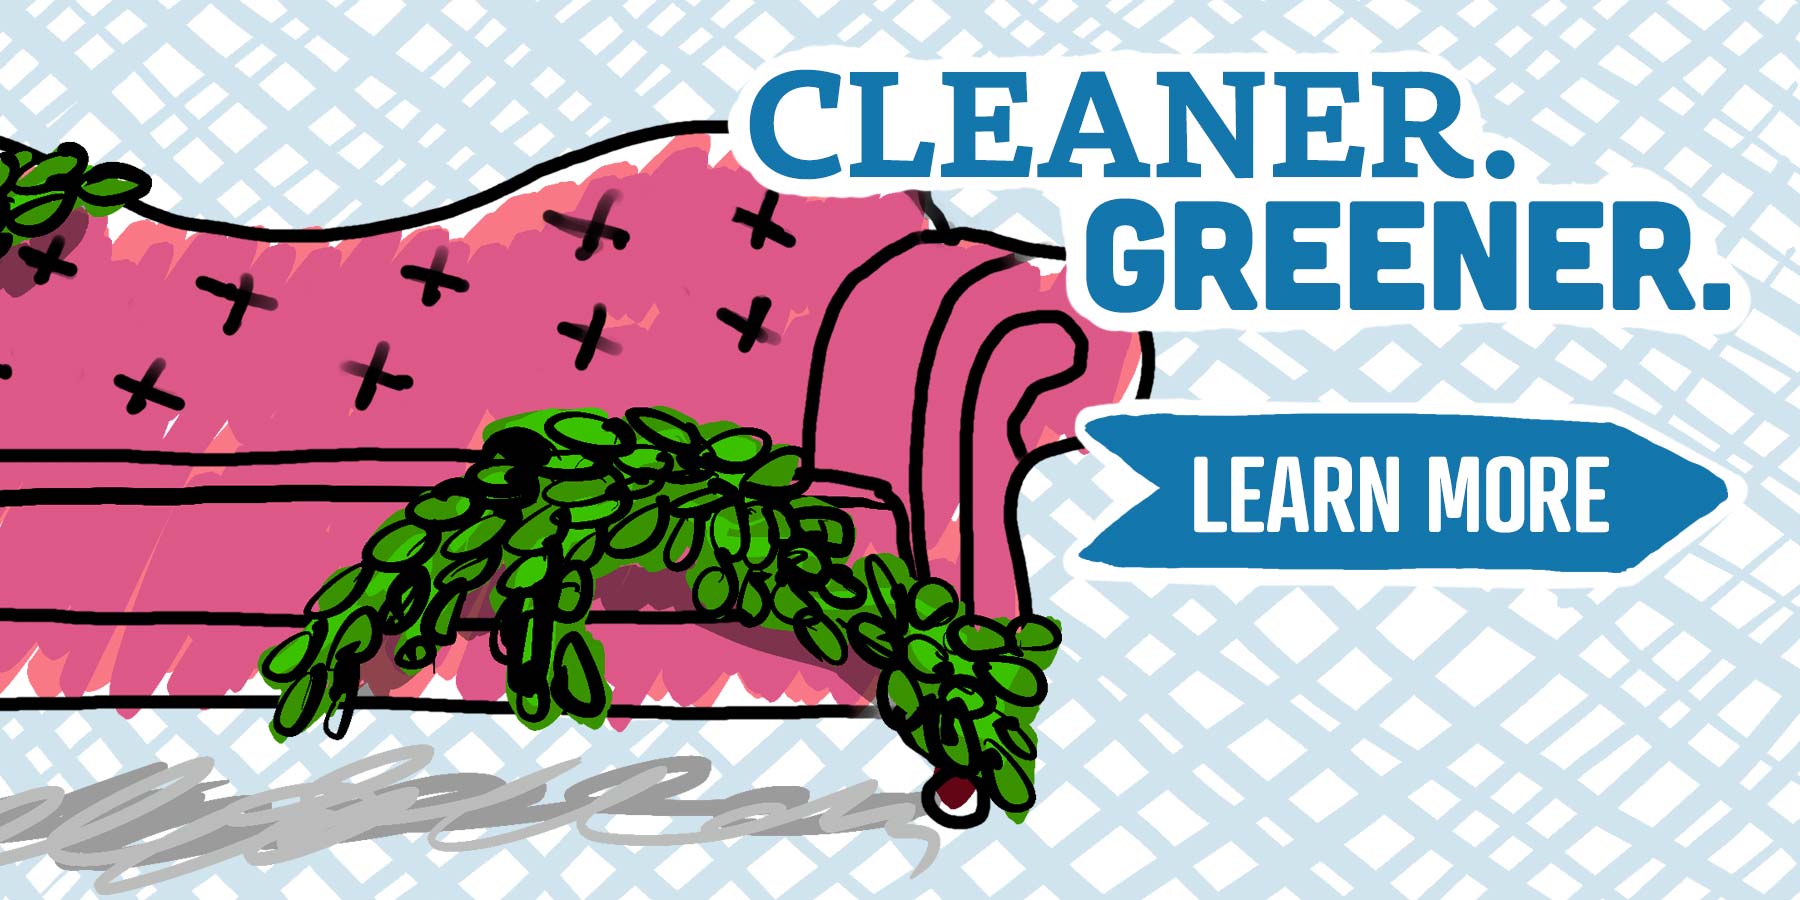 Cleaner and greener. Learn how our sofas are safer.